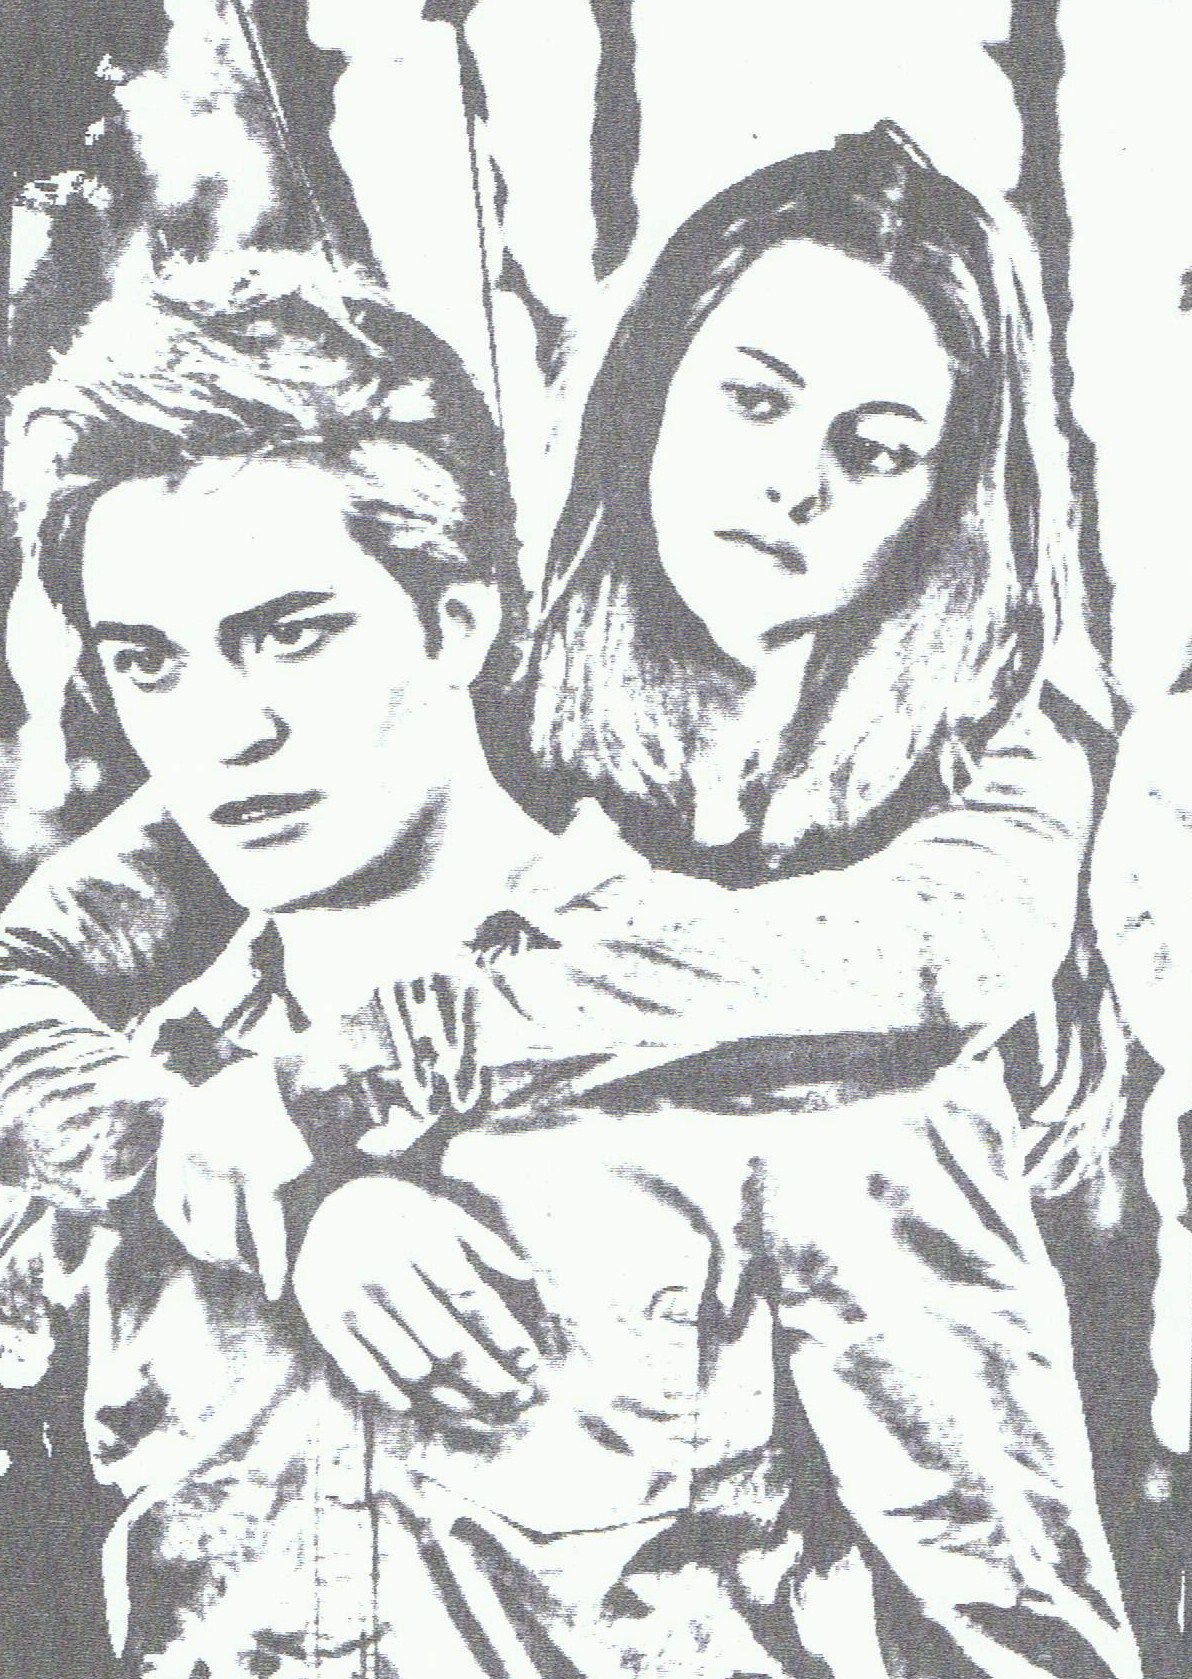 Twilight Edward Coloring Pages Related Keywords & Suggestions ...